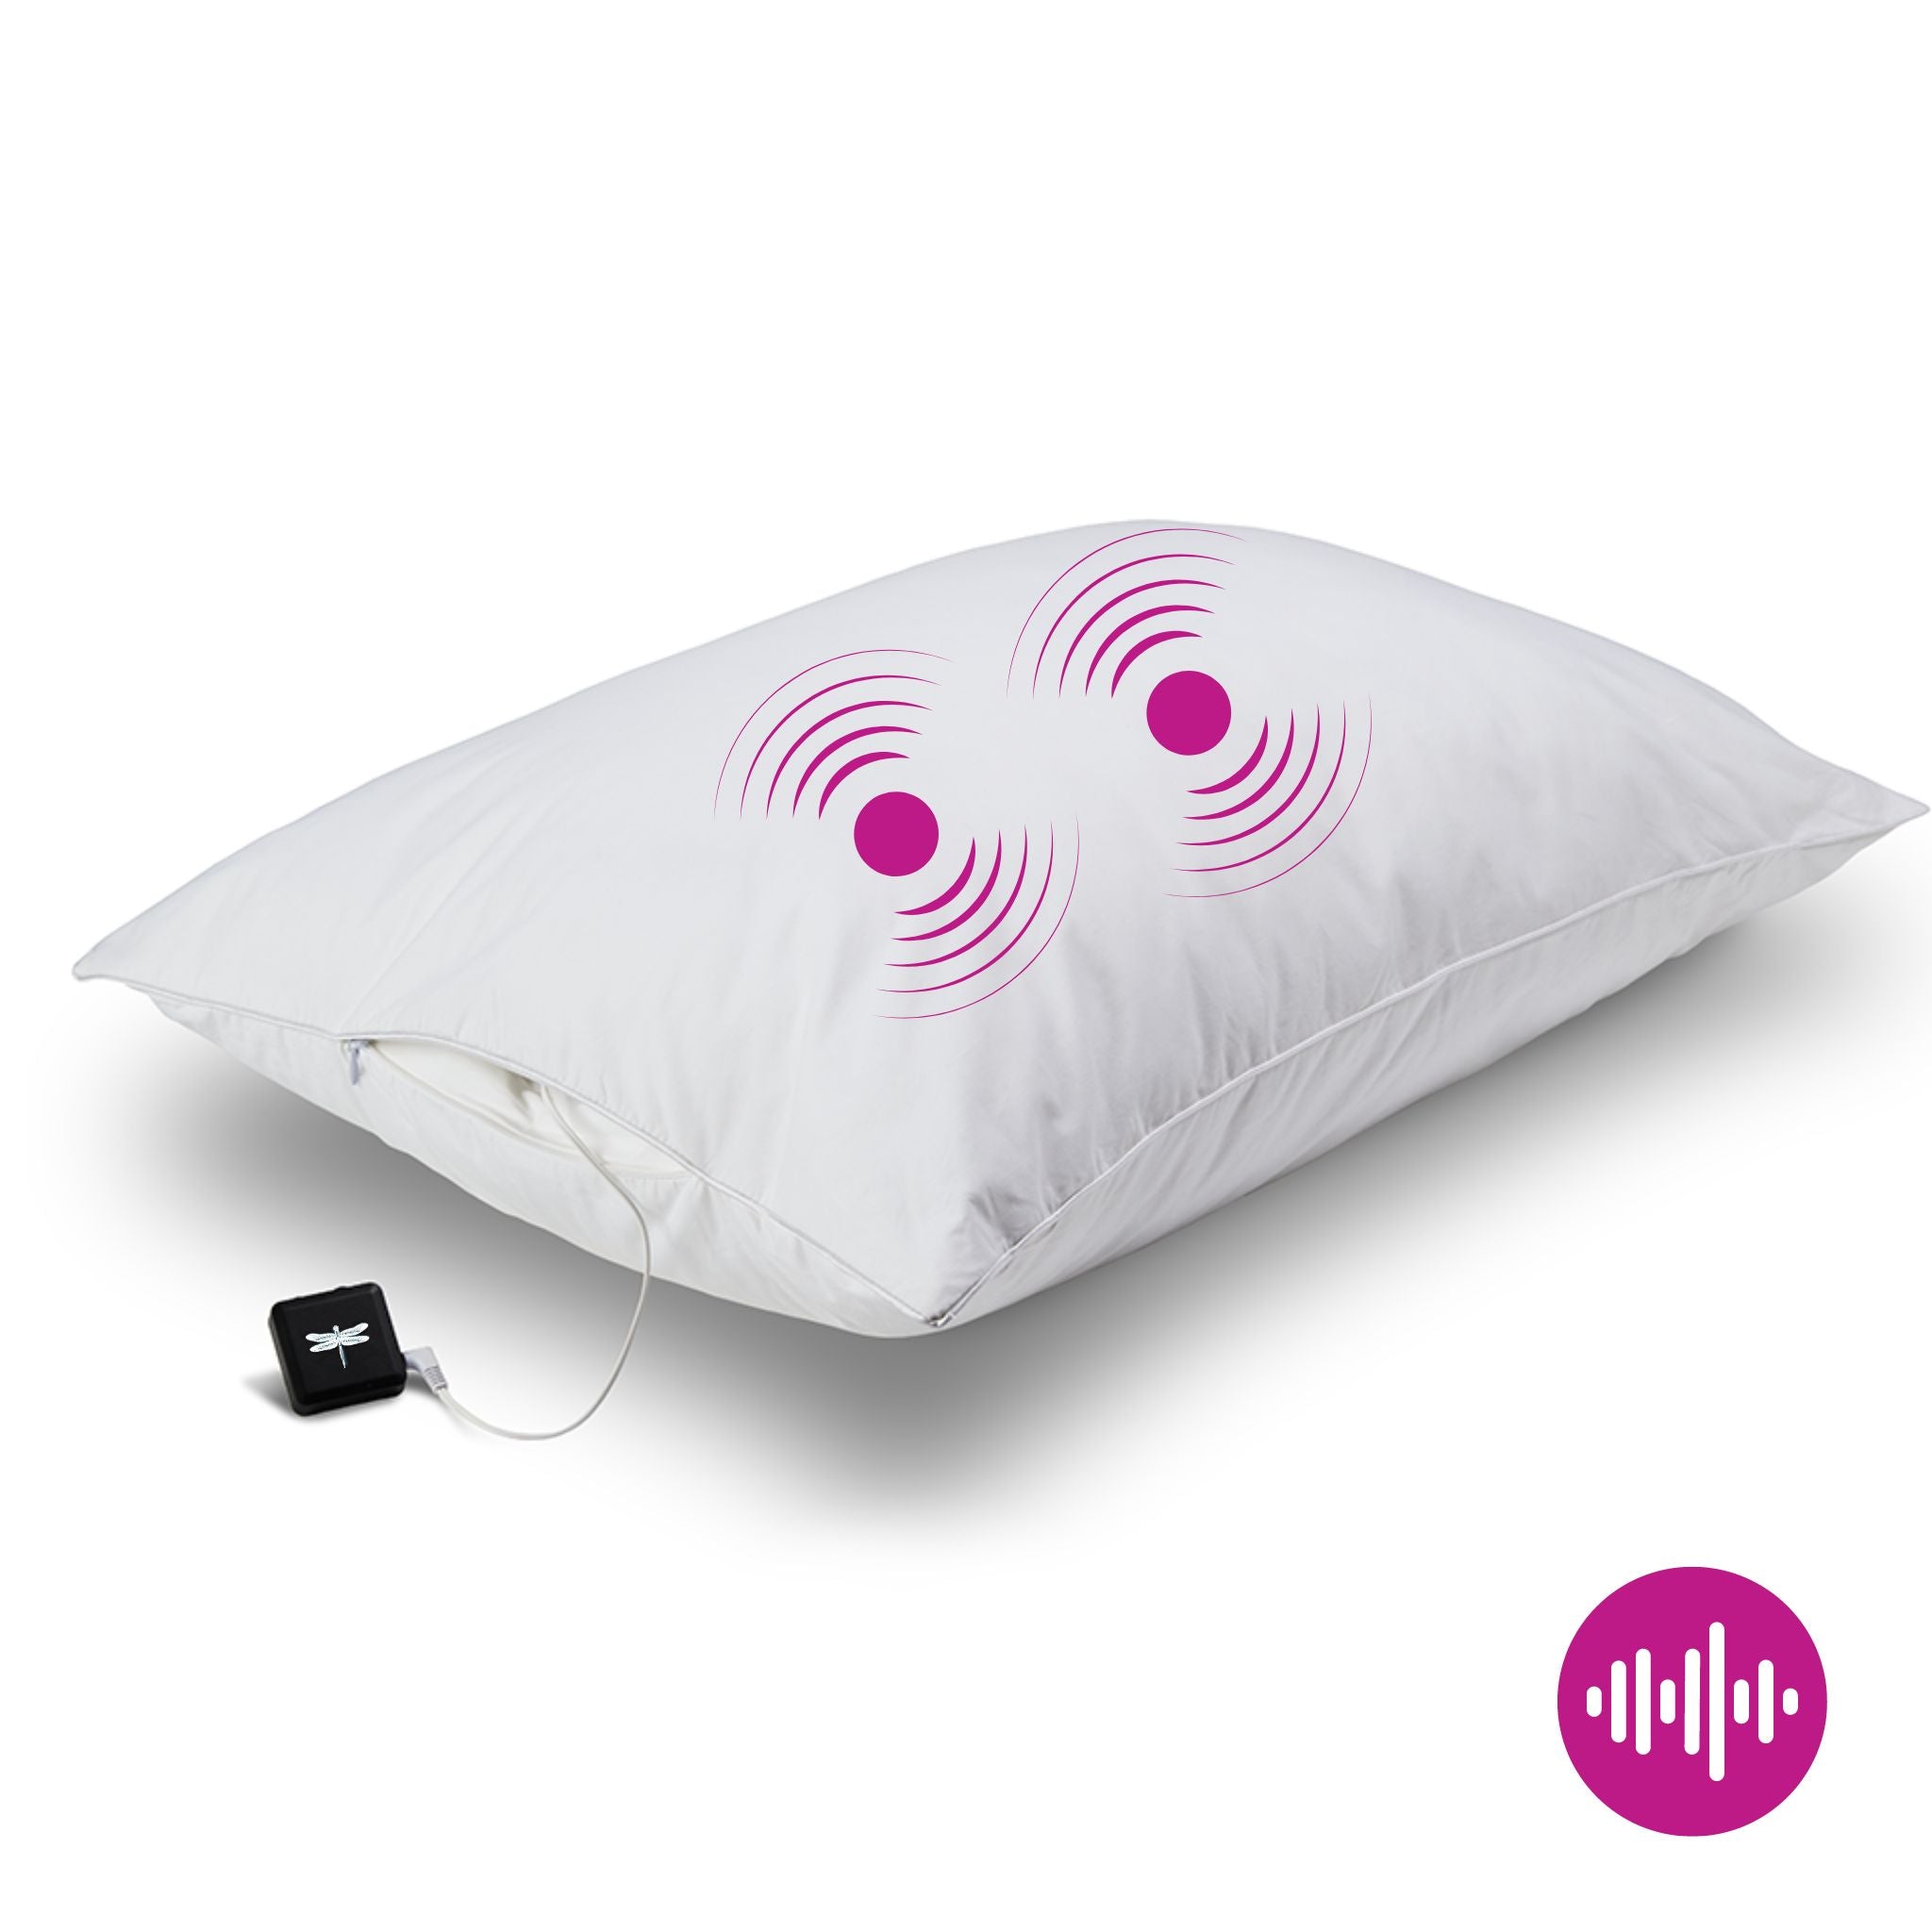 Medium Support Pillow with Bluetooth